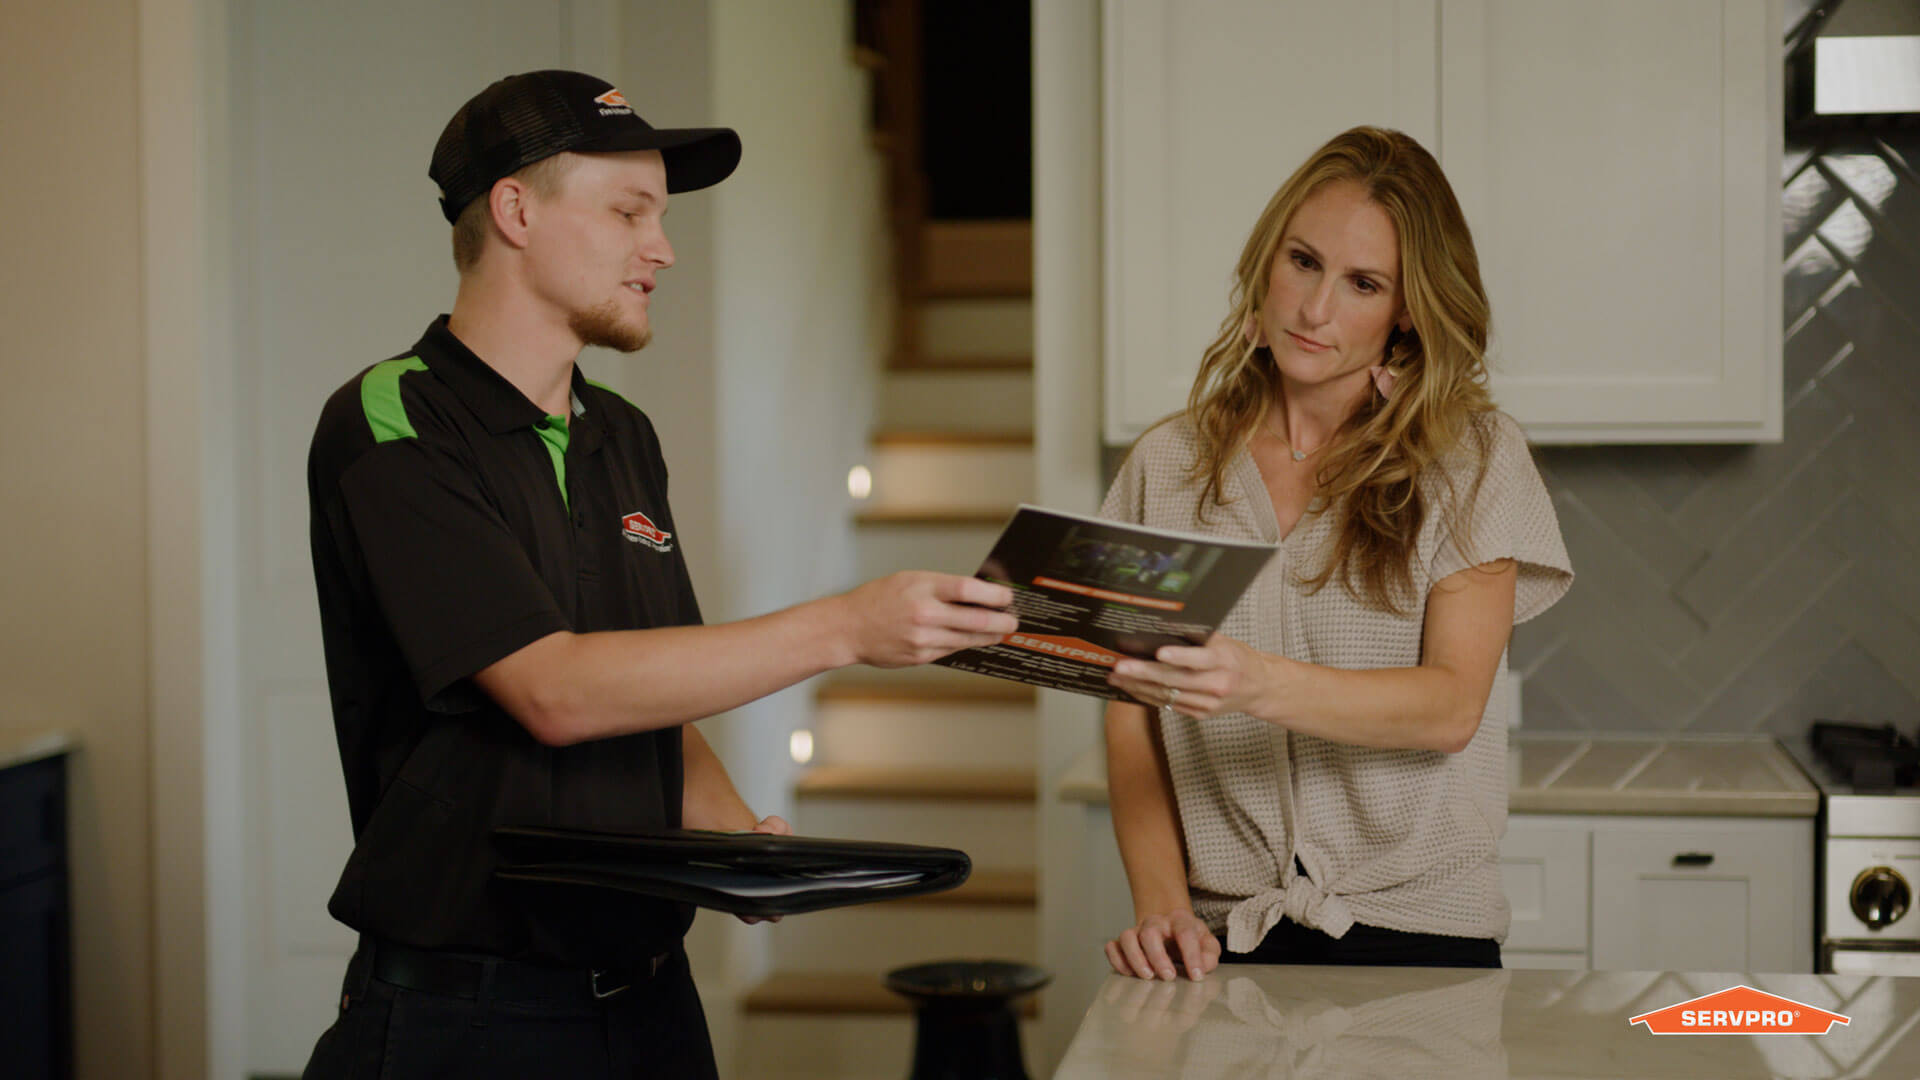 Servpro - Corporate Video Production - Charlotte Nc